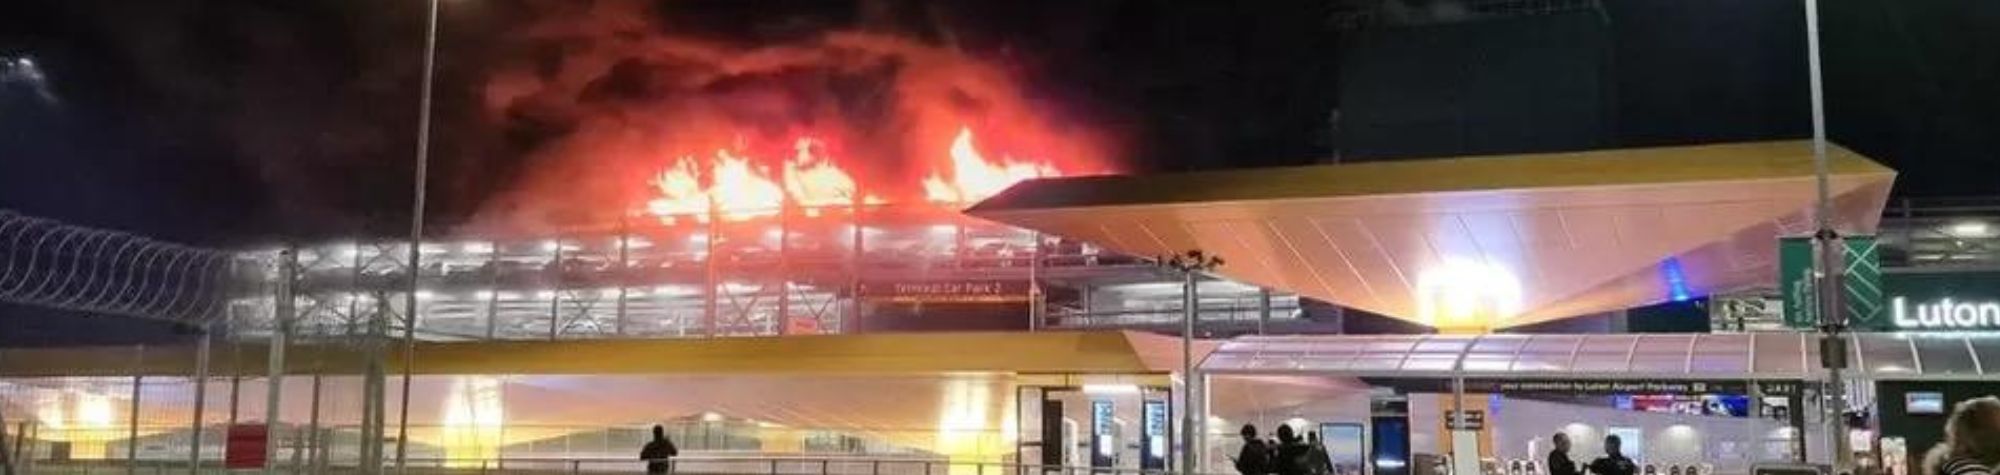 Strengthening Fire-Damaged Structures with Carbon Fibre: Lessons from Luton Airport Fire